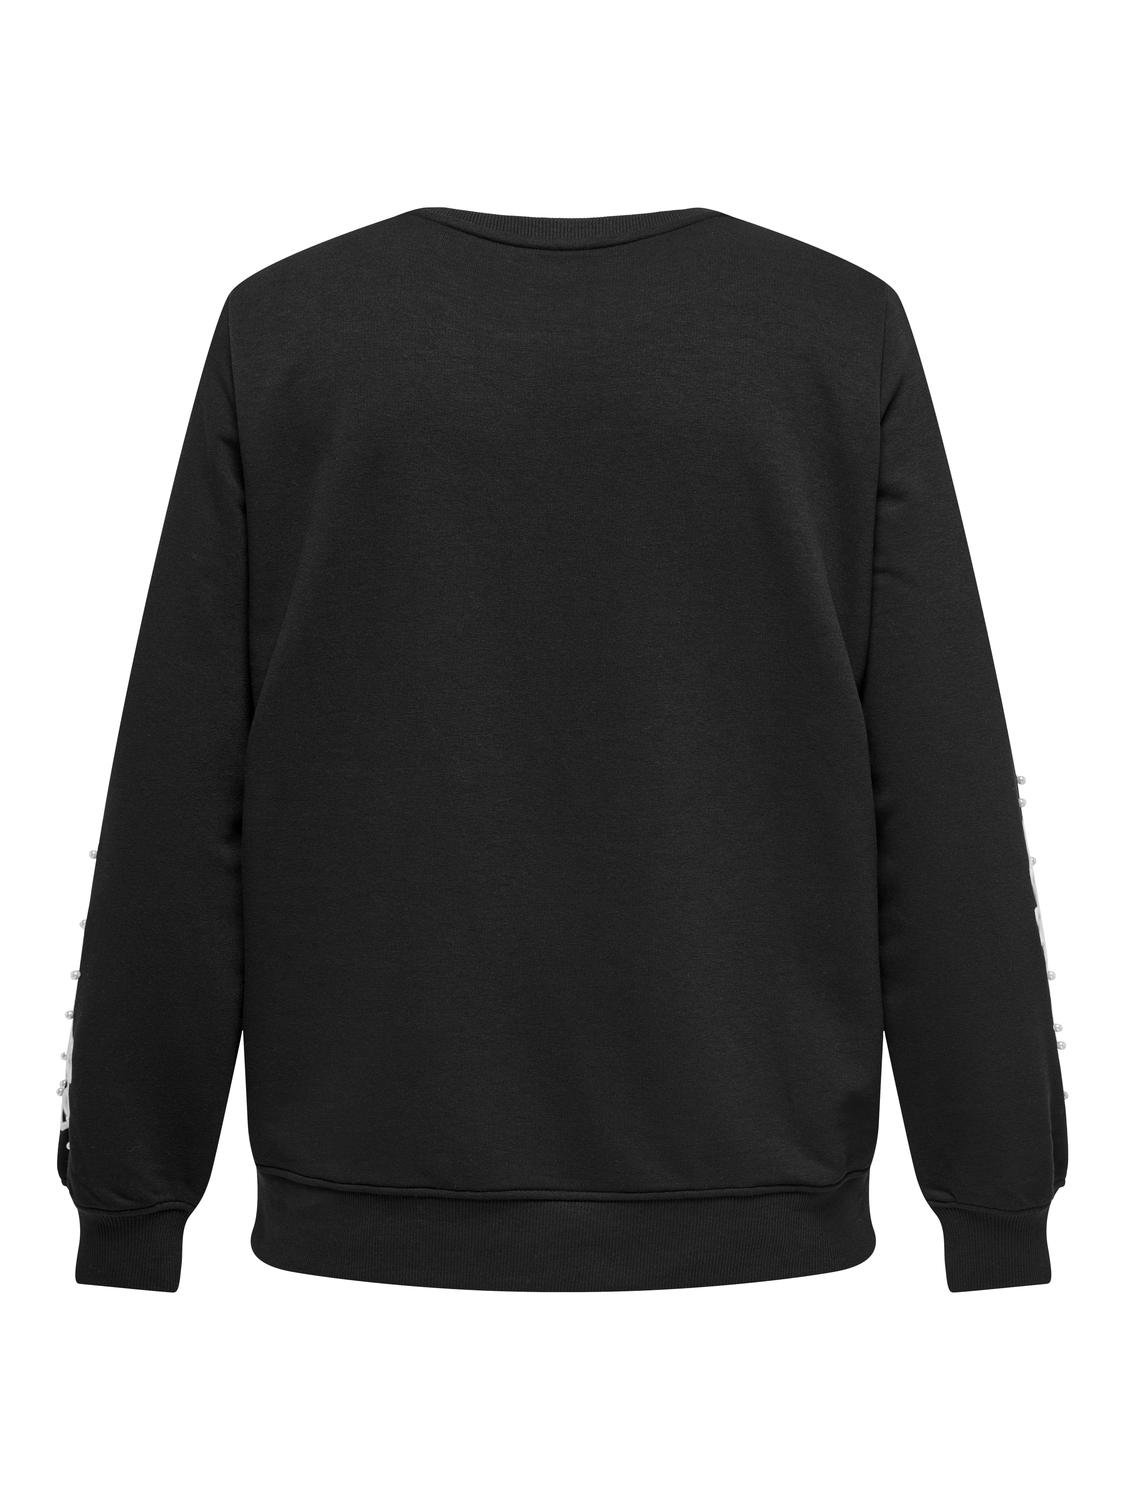 ONLY Regular Fit Round Neck Dropped shoulders Sweatshirts -Black - 15335885